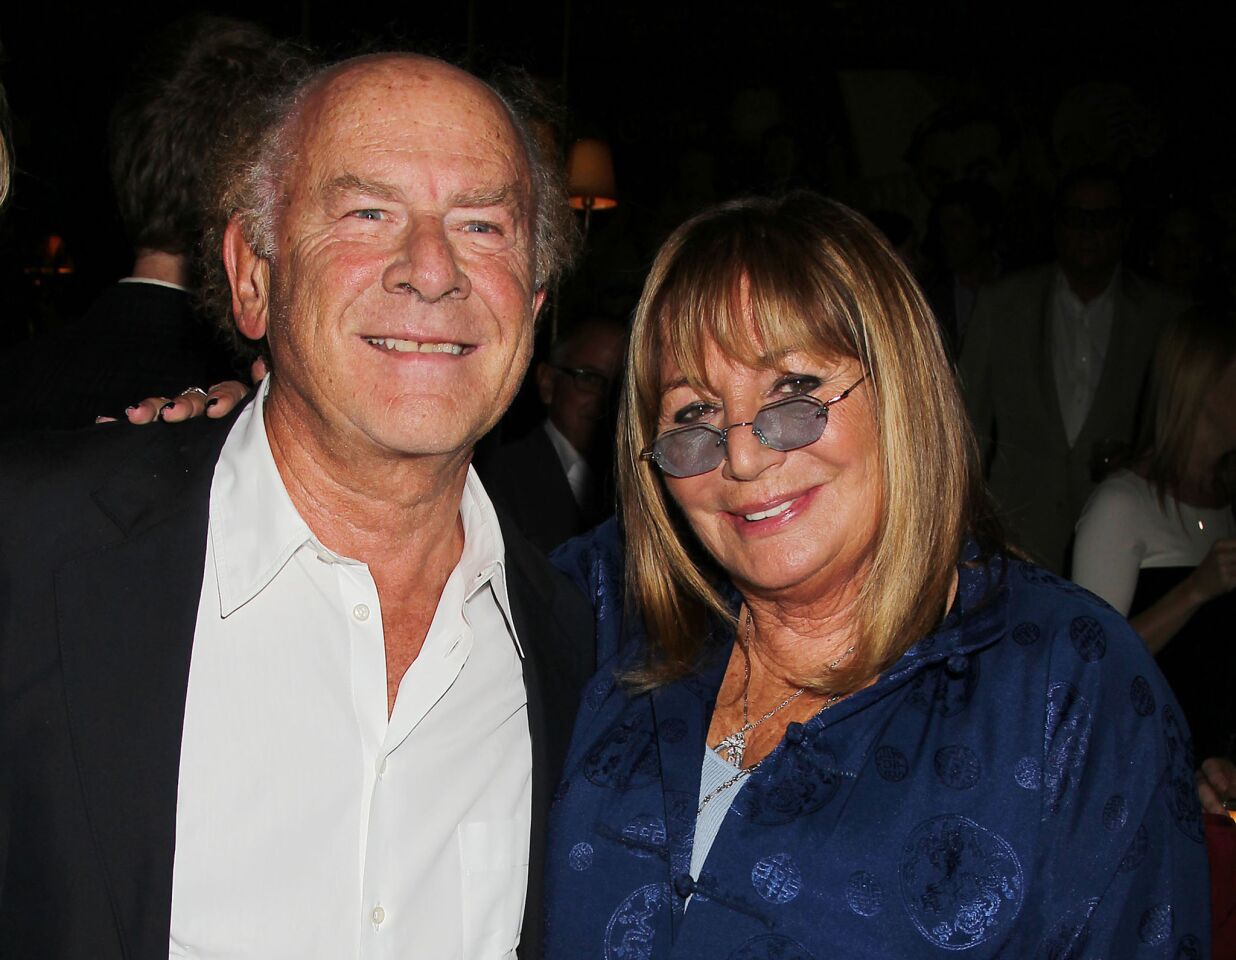 Penny Marshall threw a book party for her memoir, "My Mother Was Nuts," in 2012 at a New York venue. Singer Art Garfunkel was among those in attendance.